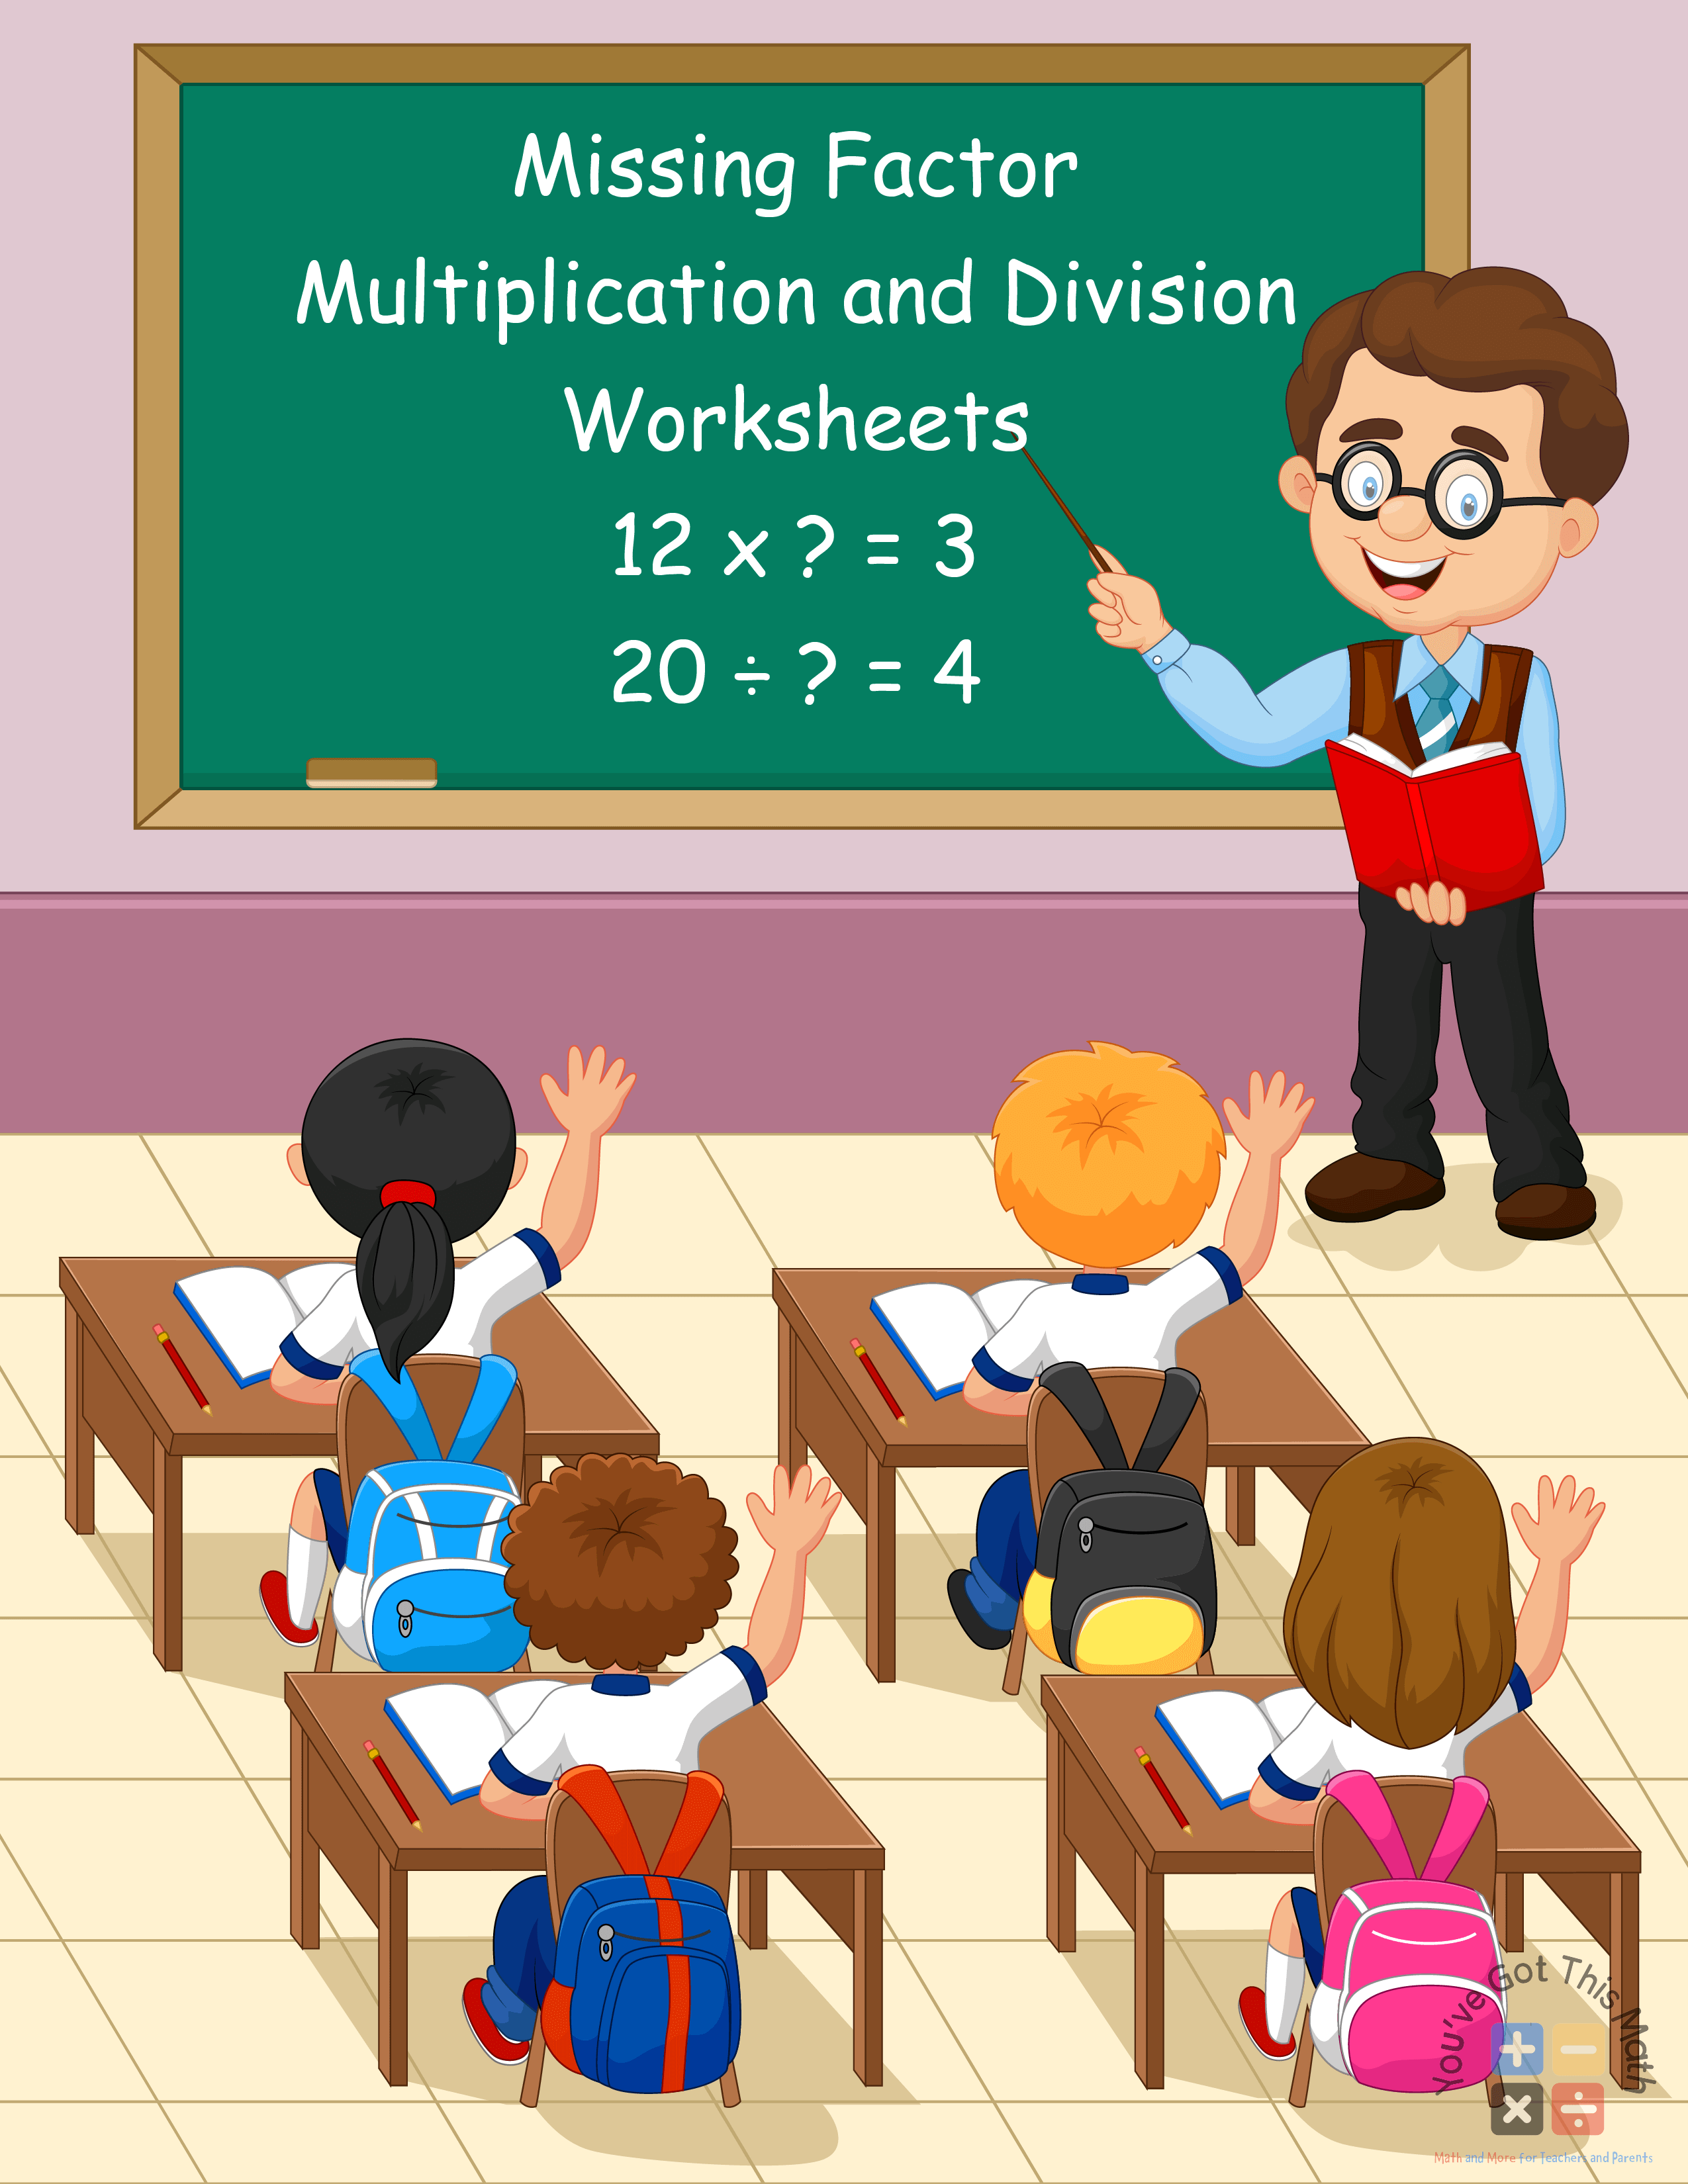 6 Missing Factor Multiplication and Division Worksheets | Free Printable